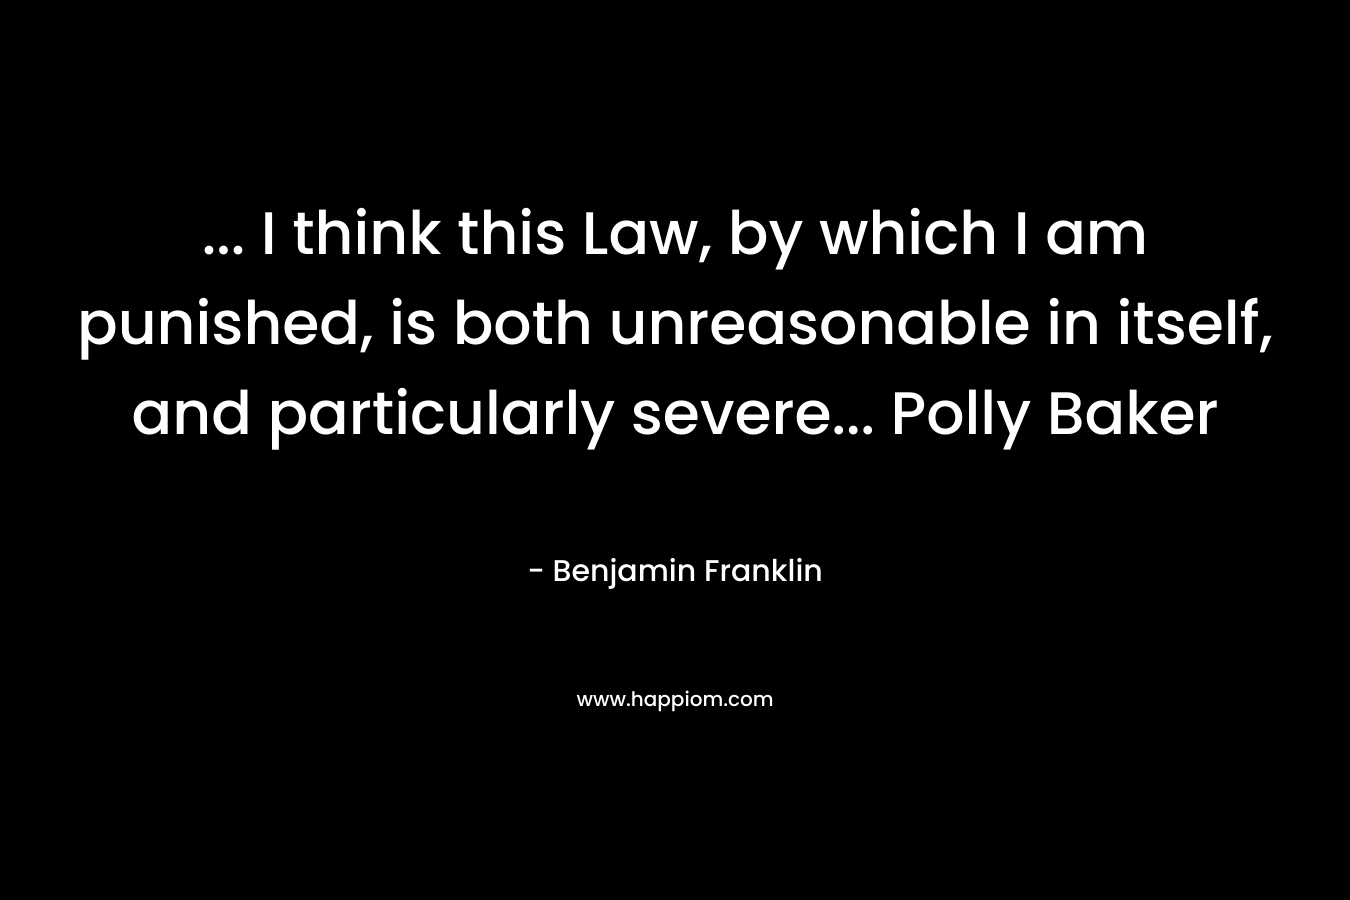 ... I think this Law, by which I am punished, is both unreasonable in itself, and particularly severe... Polly Baker